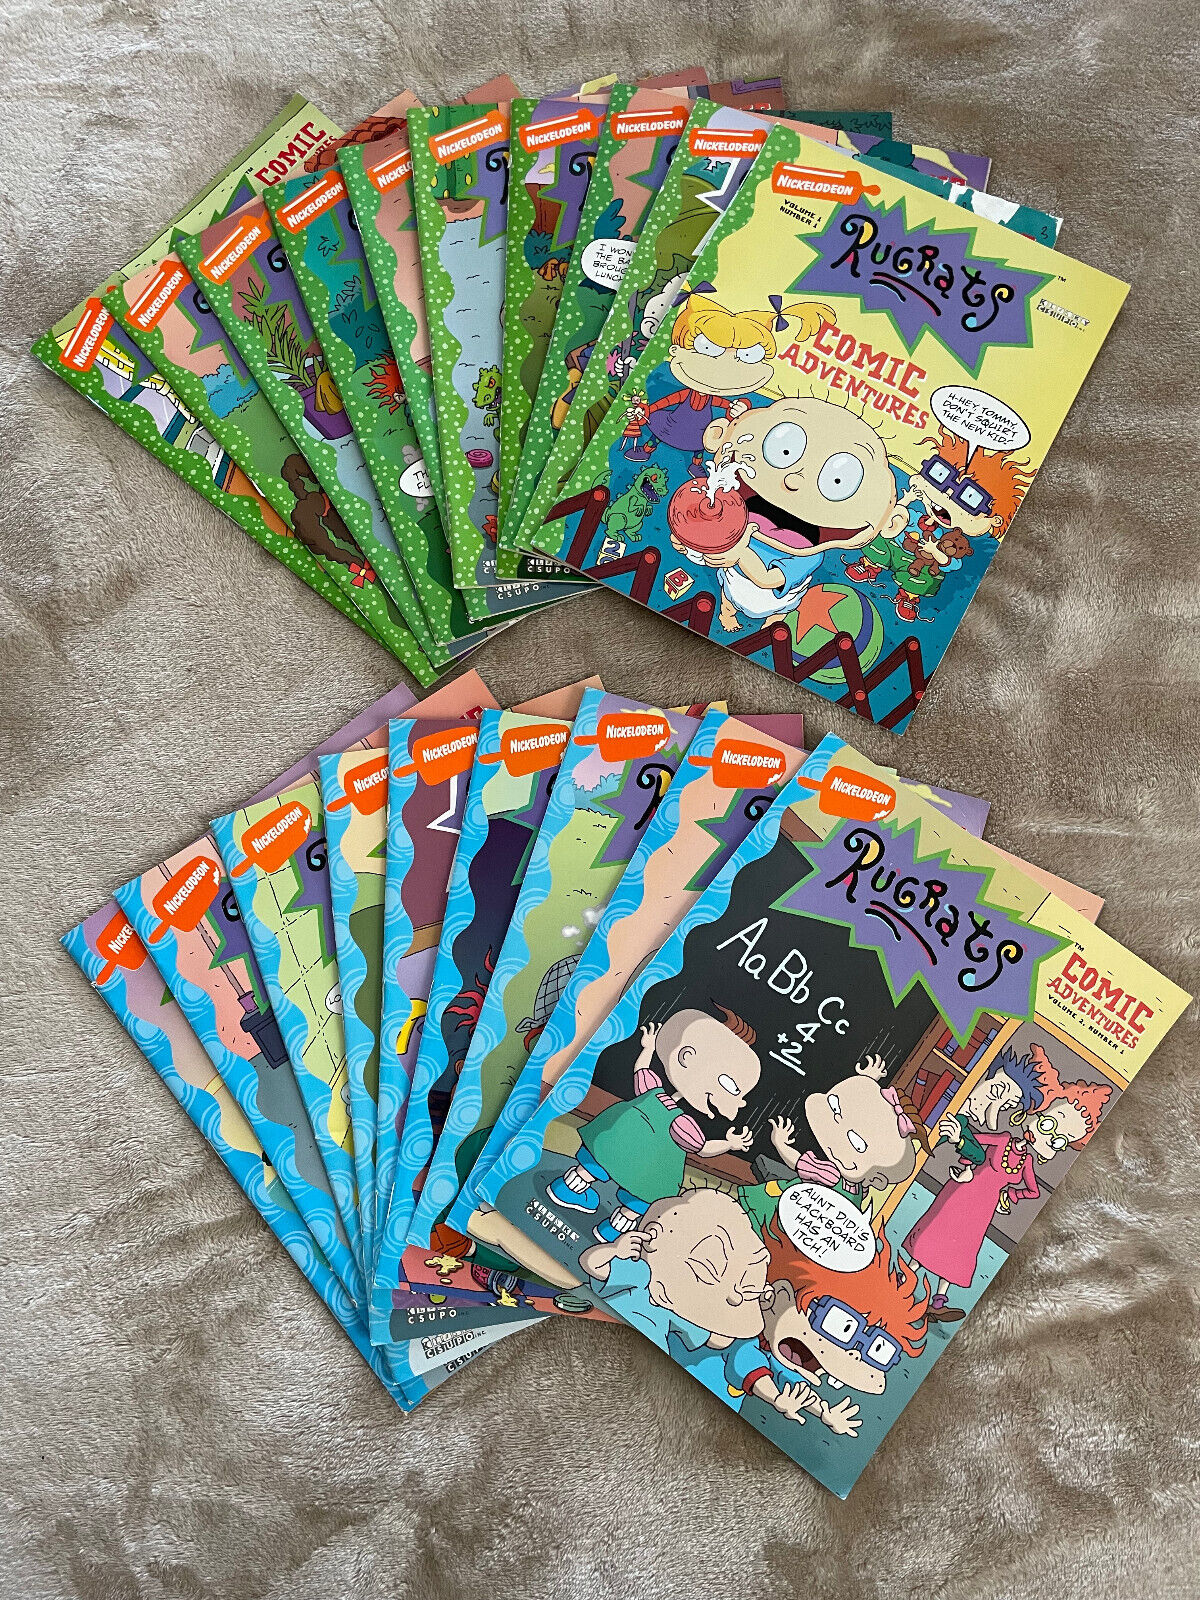 Rugrats Comic Adventures - 19 issues, complete Vol 1 and 9/10 Vol 2, Nickelodeon